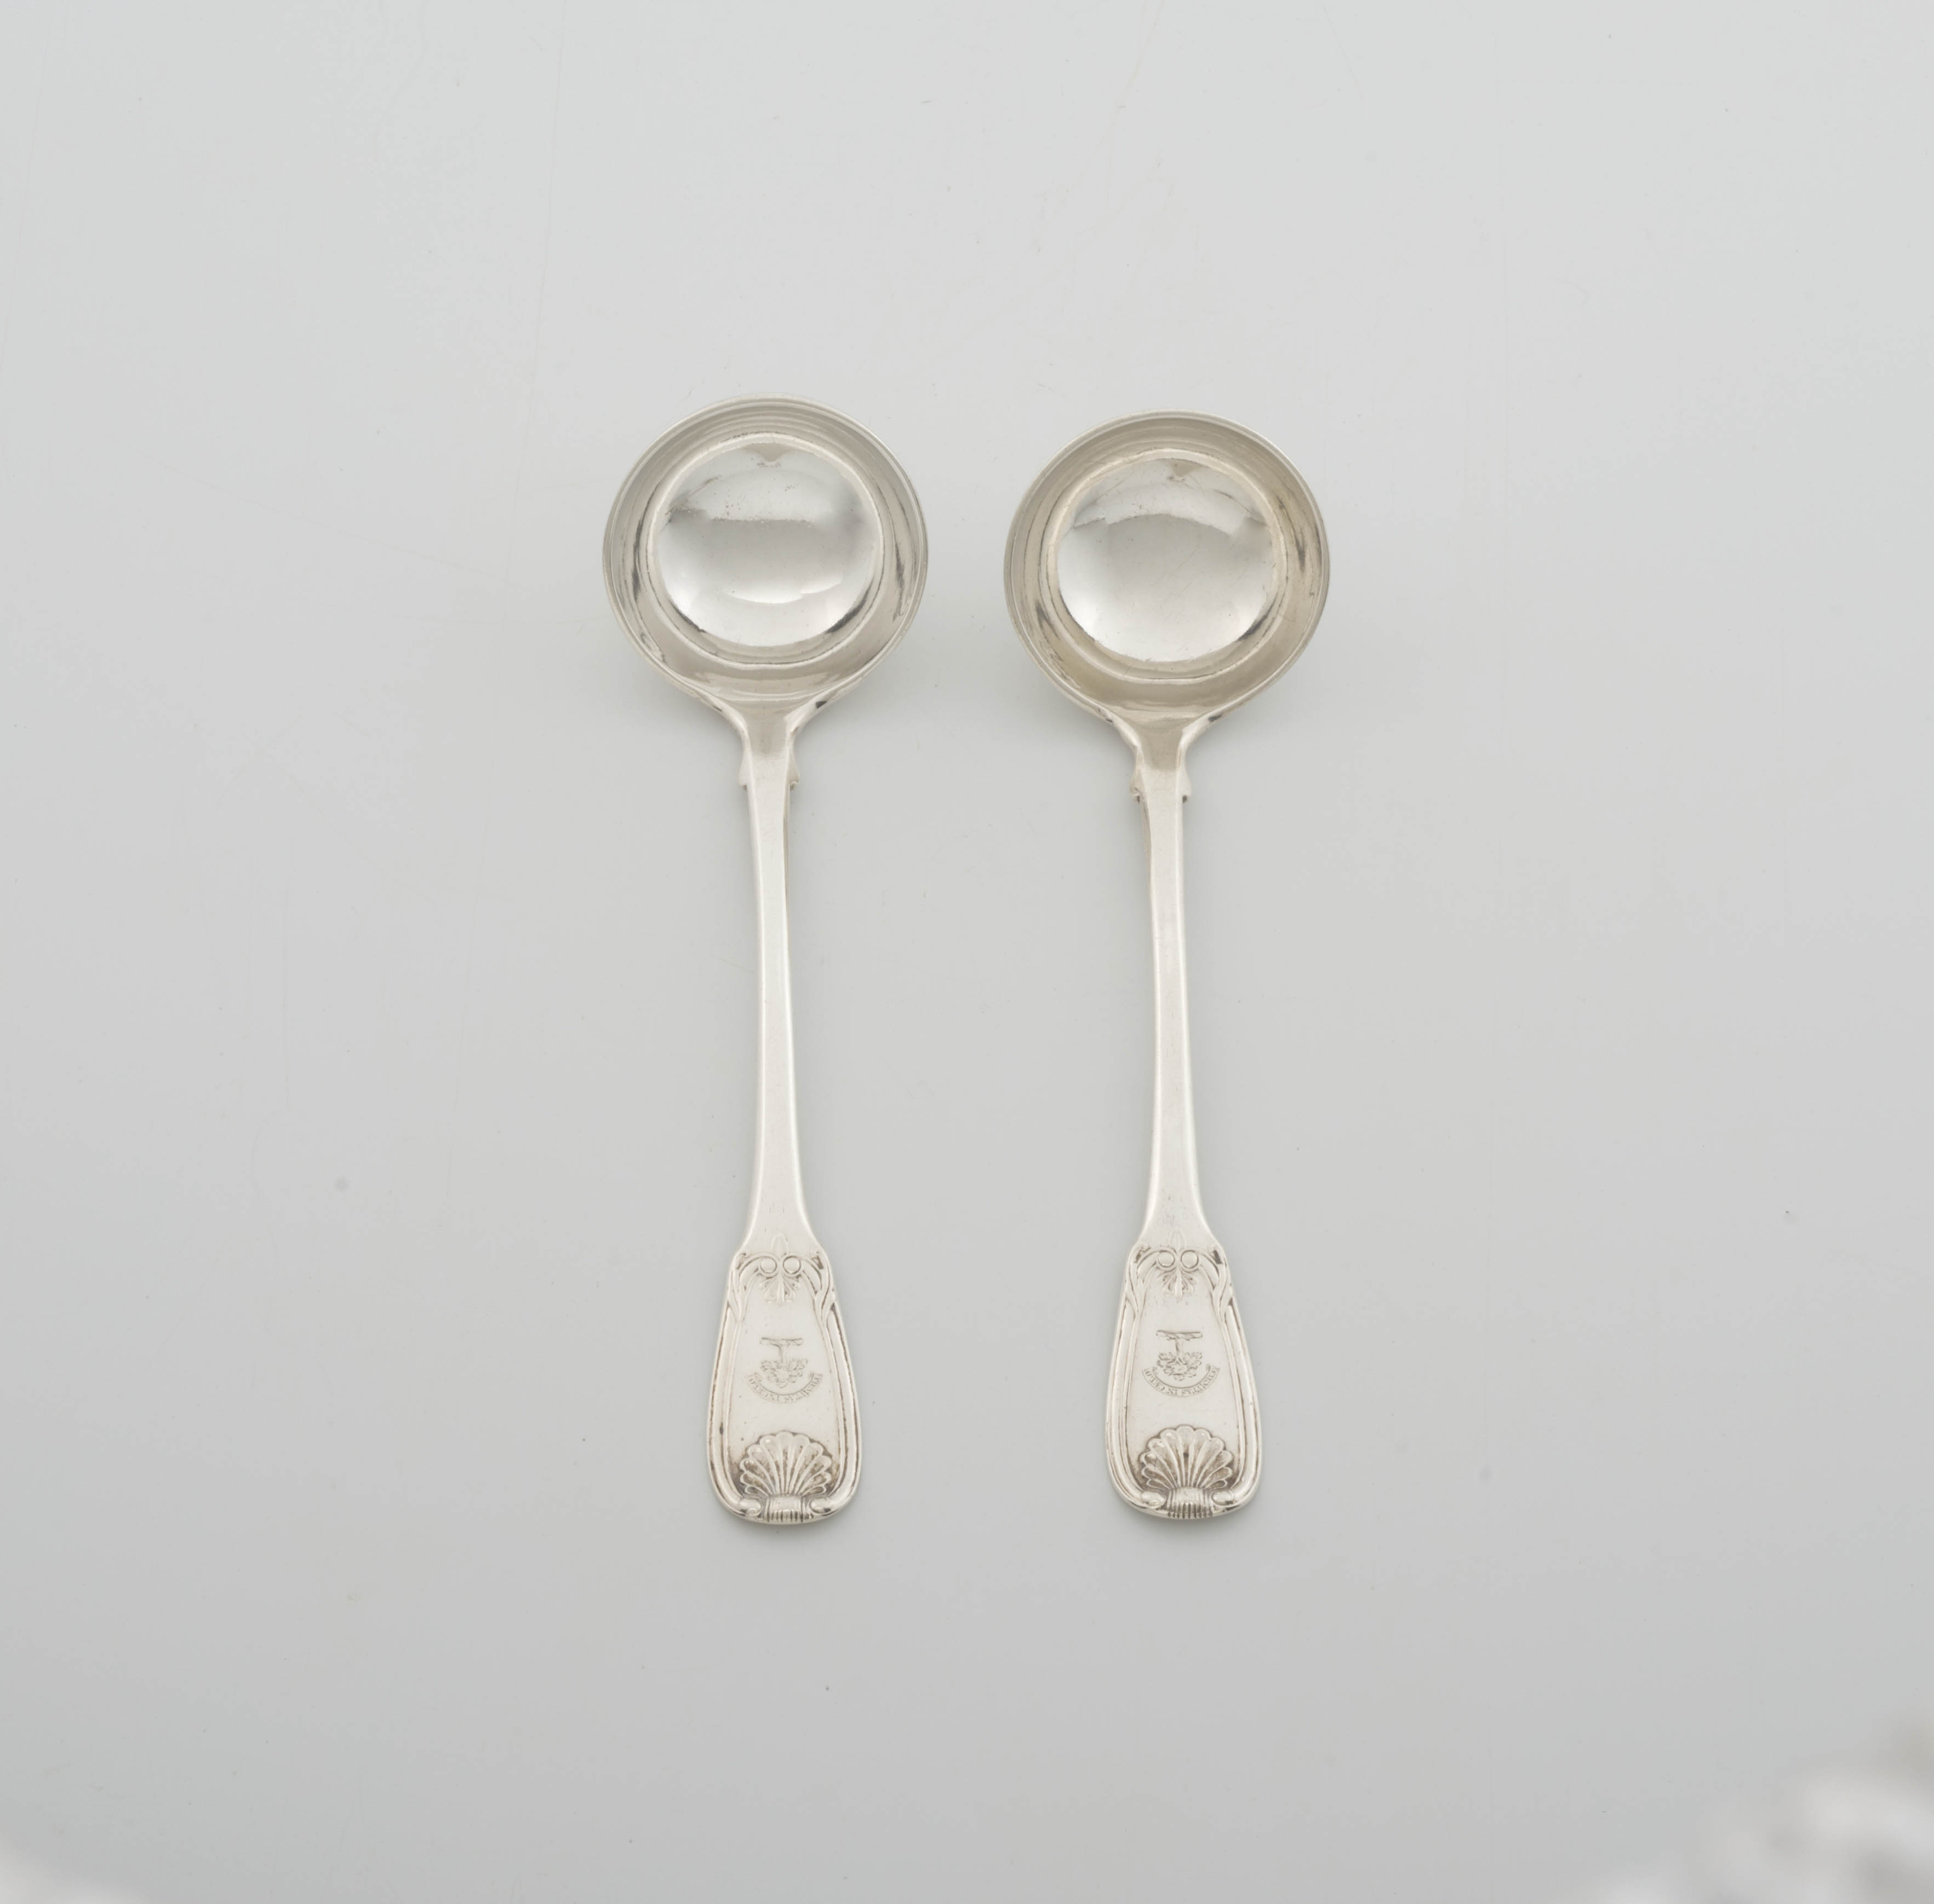 A pair of George III silver Fiddle and Shell pattern sauce ladles, Robert Gray & Son, Edinburgh, 1814